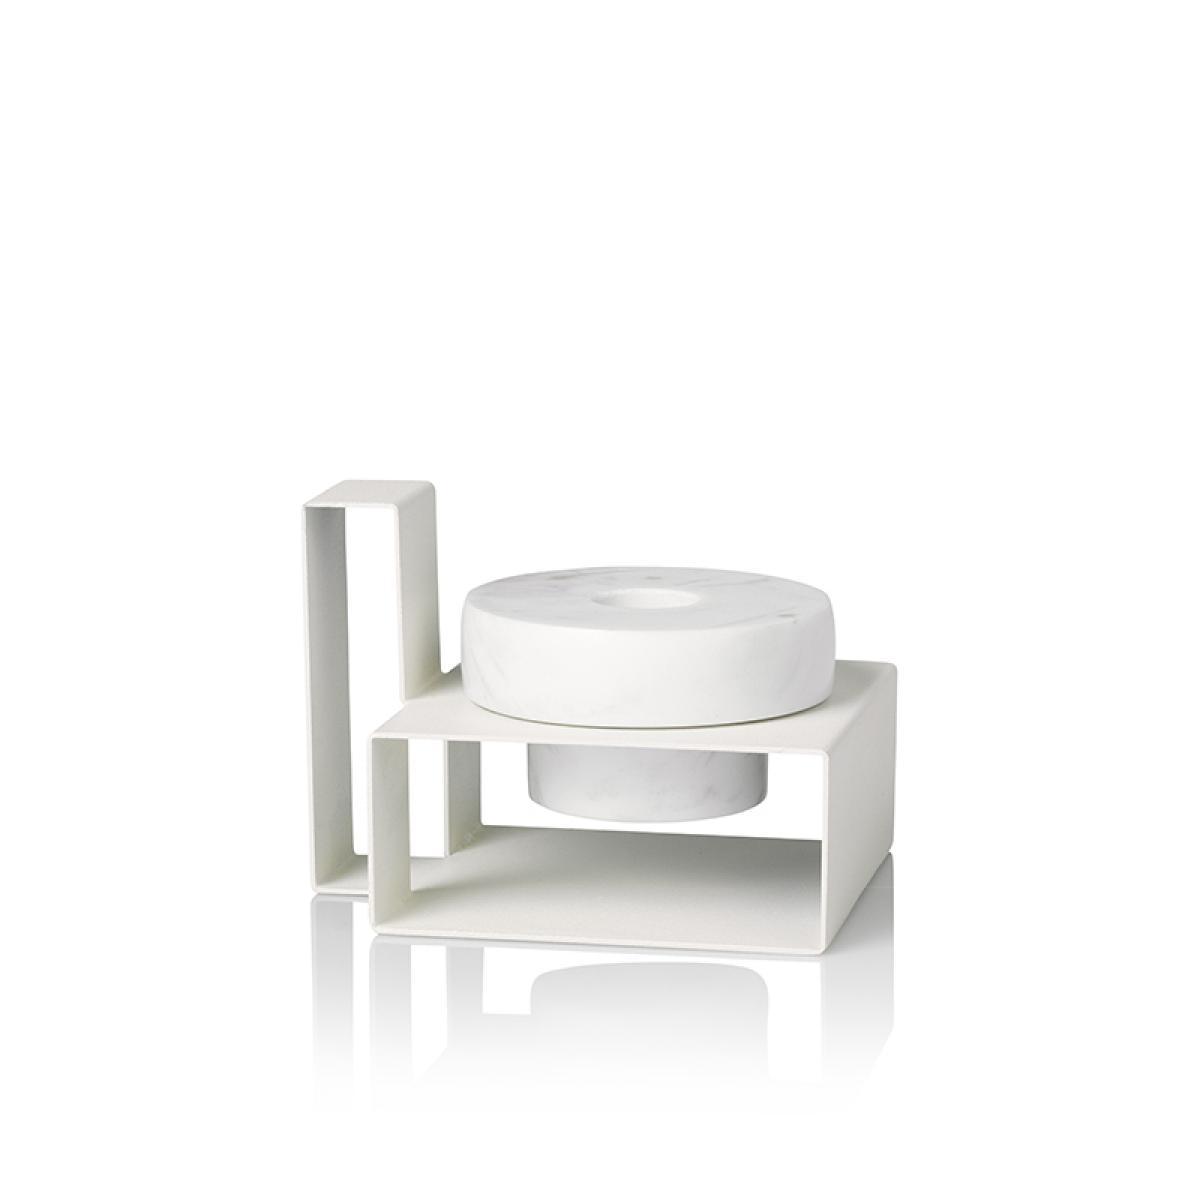 Lucie Kaas Marco Candlestick White, 8cm